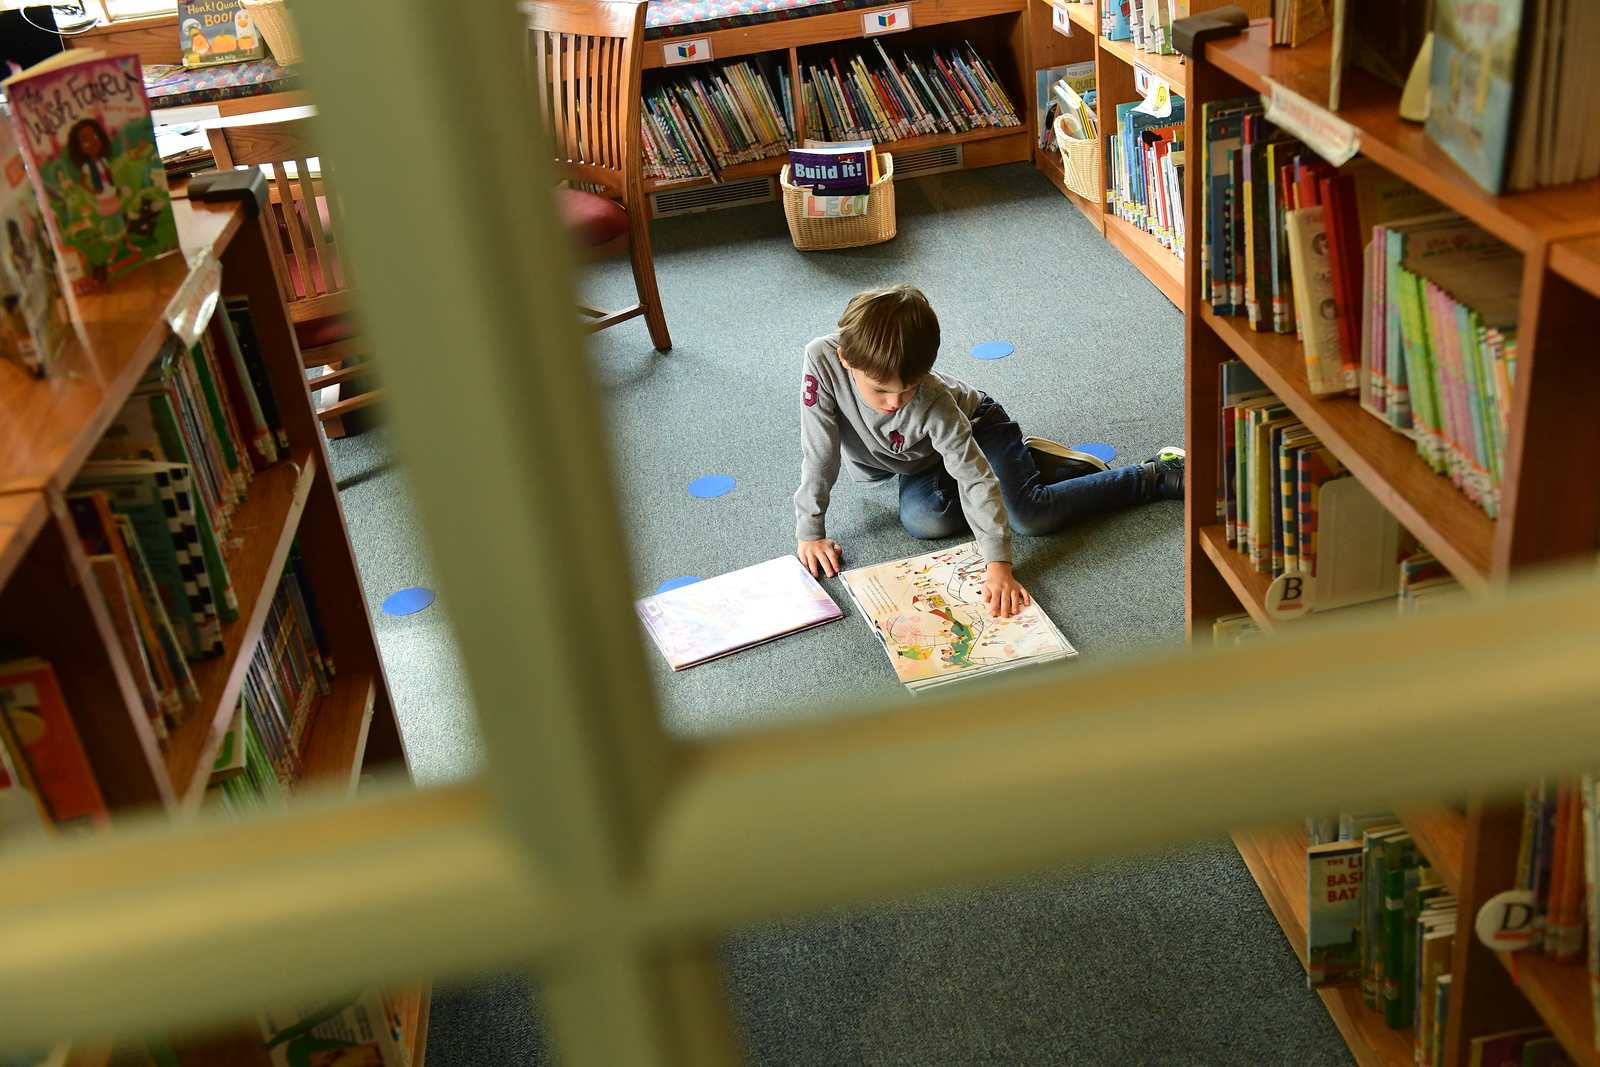 Student reads book while sitting on the floor in the Ethical Culture library.